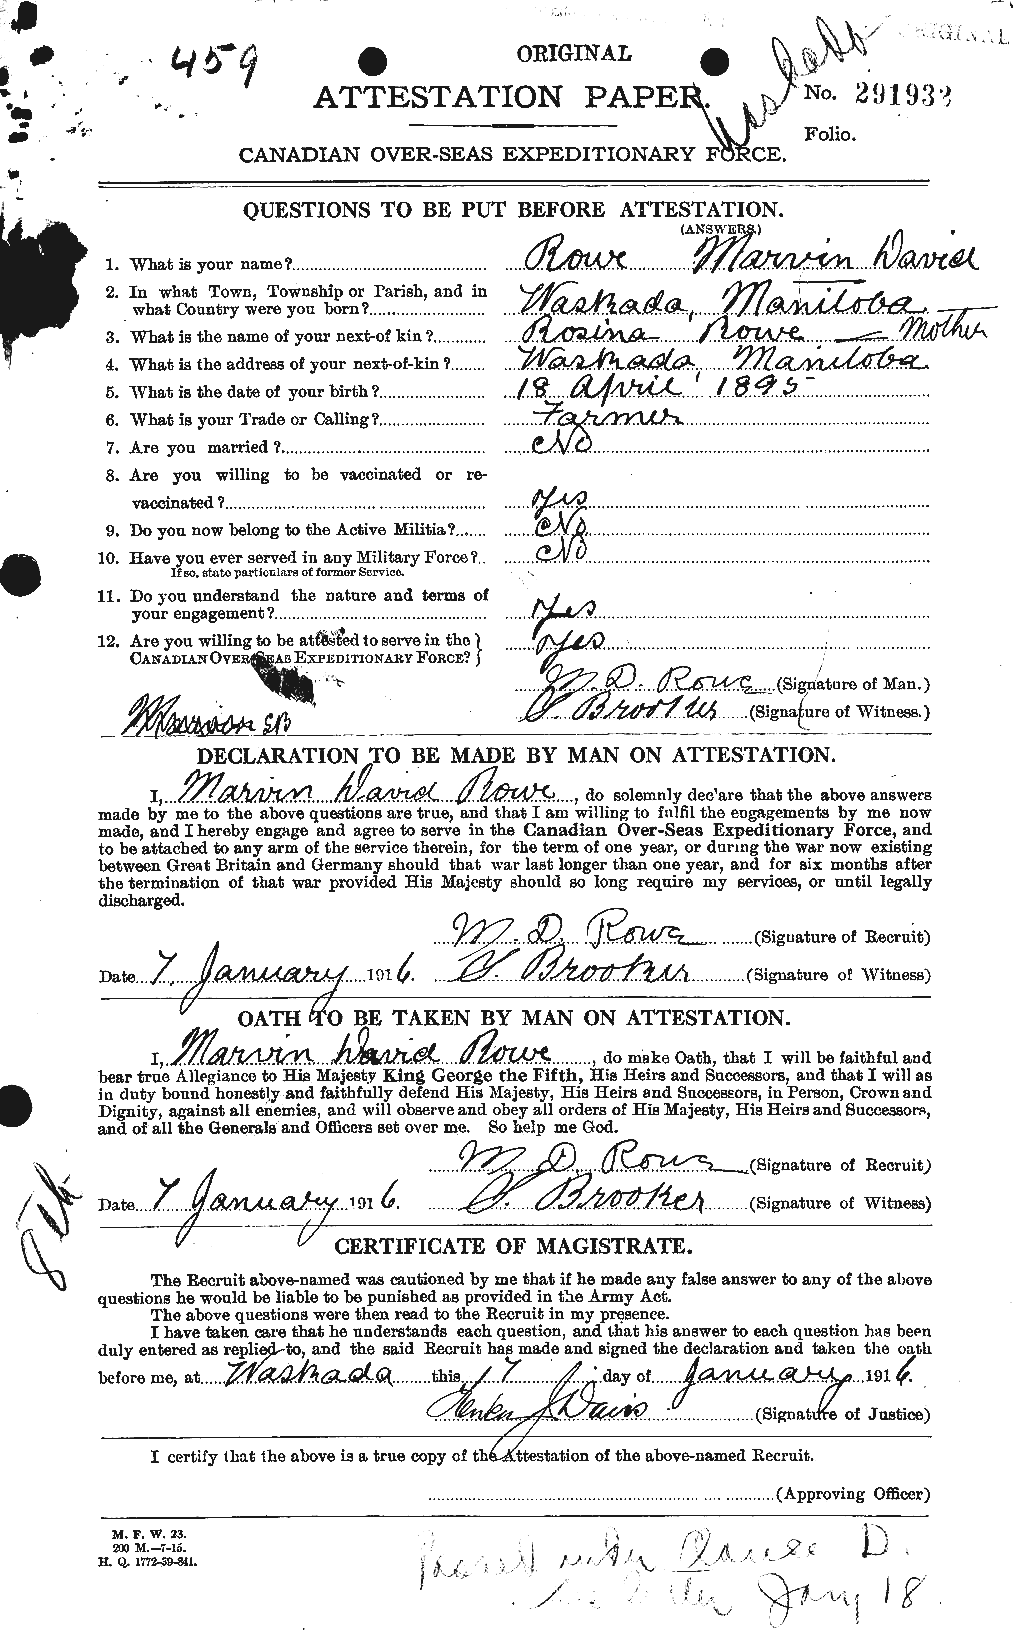 Personnel Records of the First World War - CEF 615952a